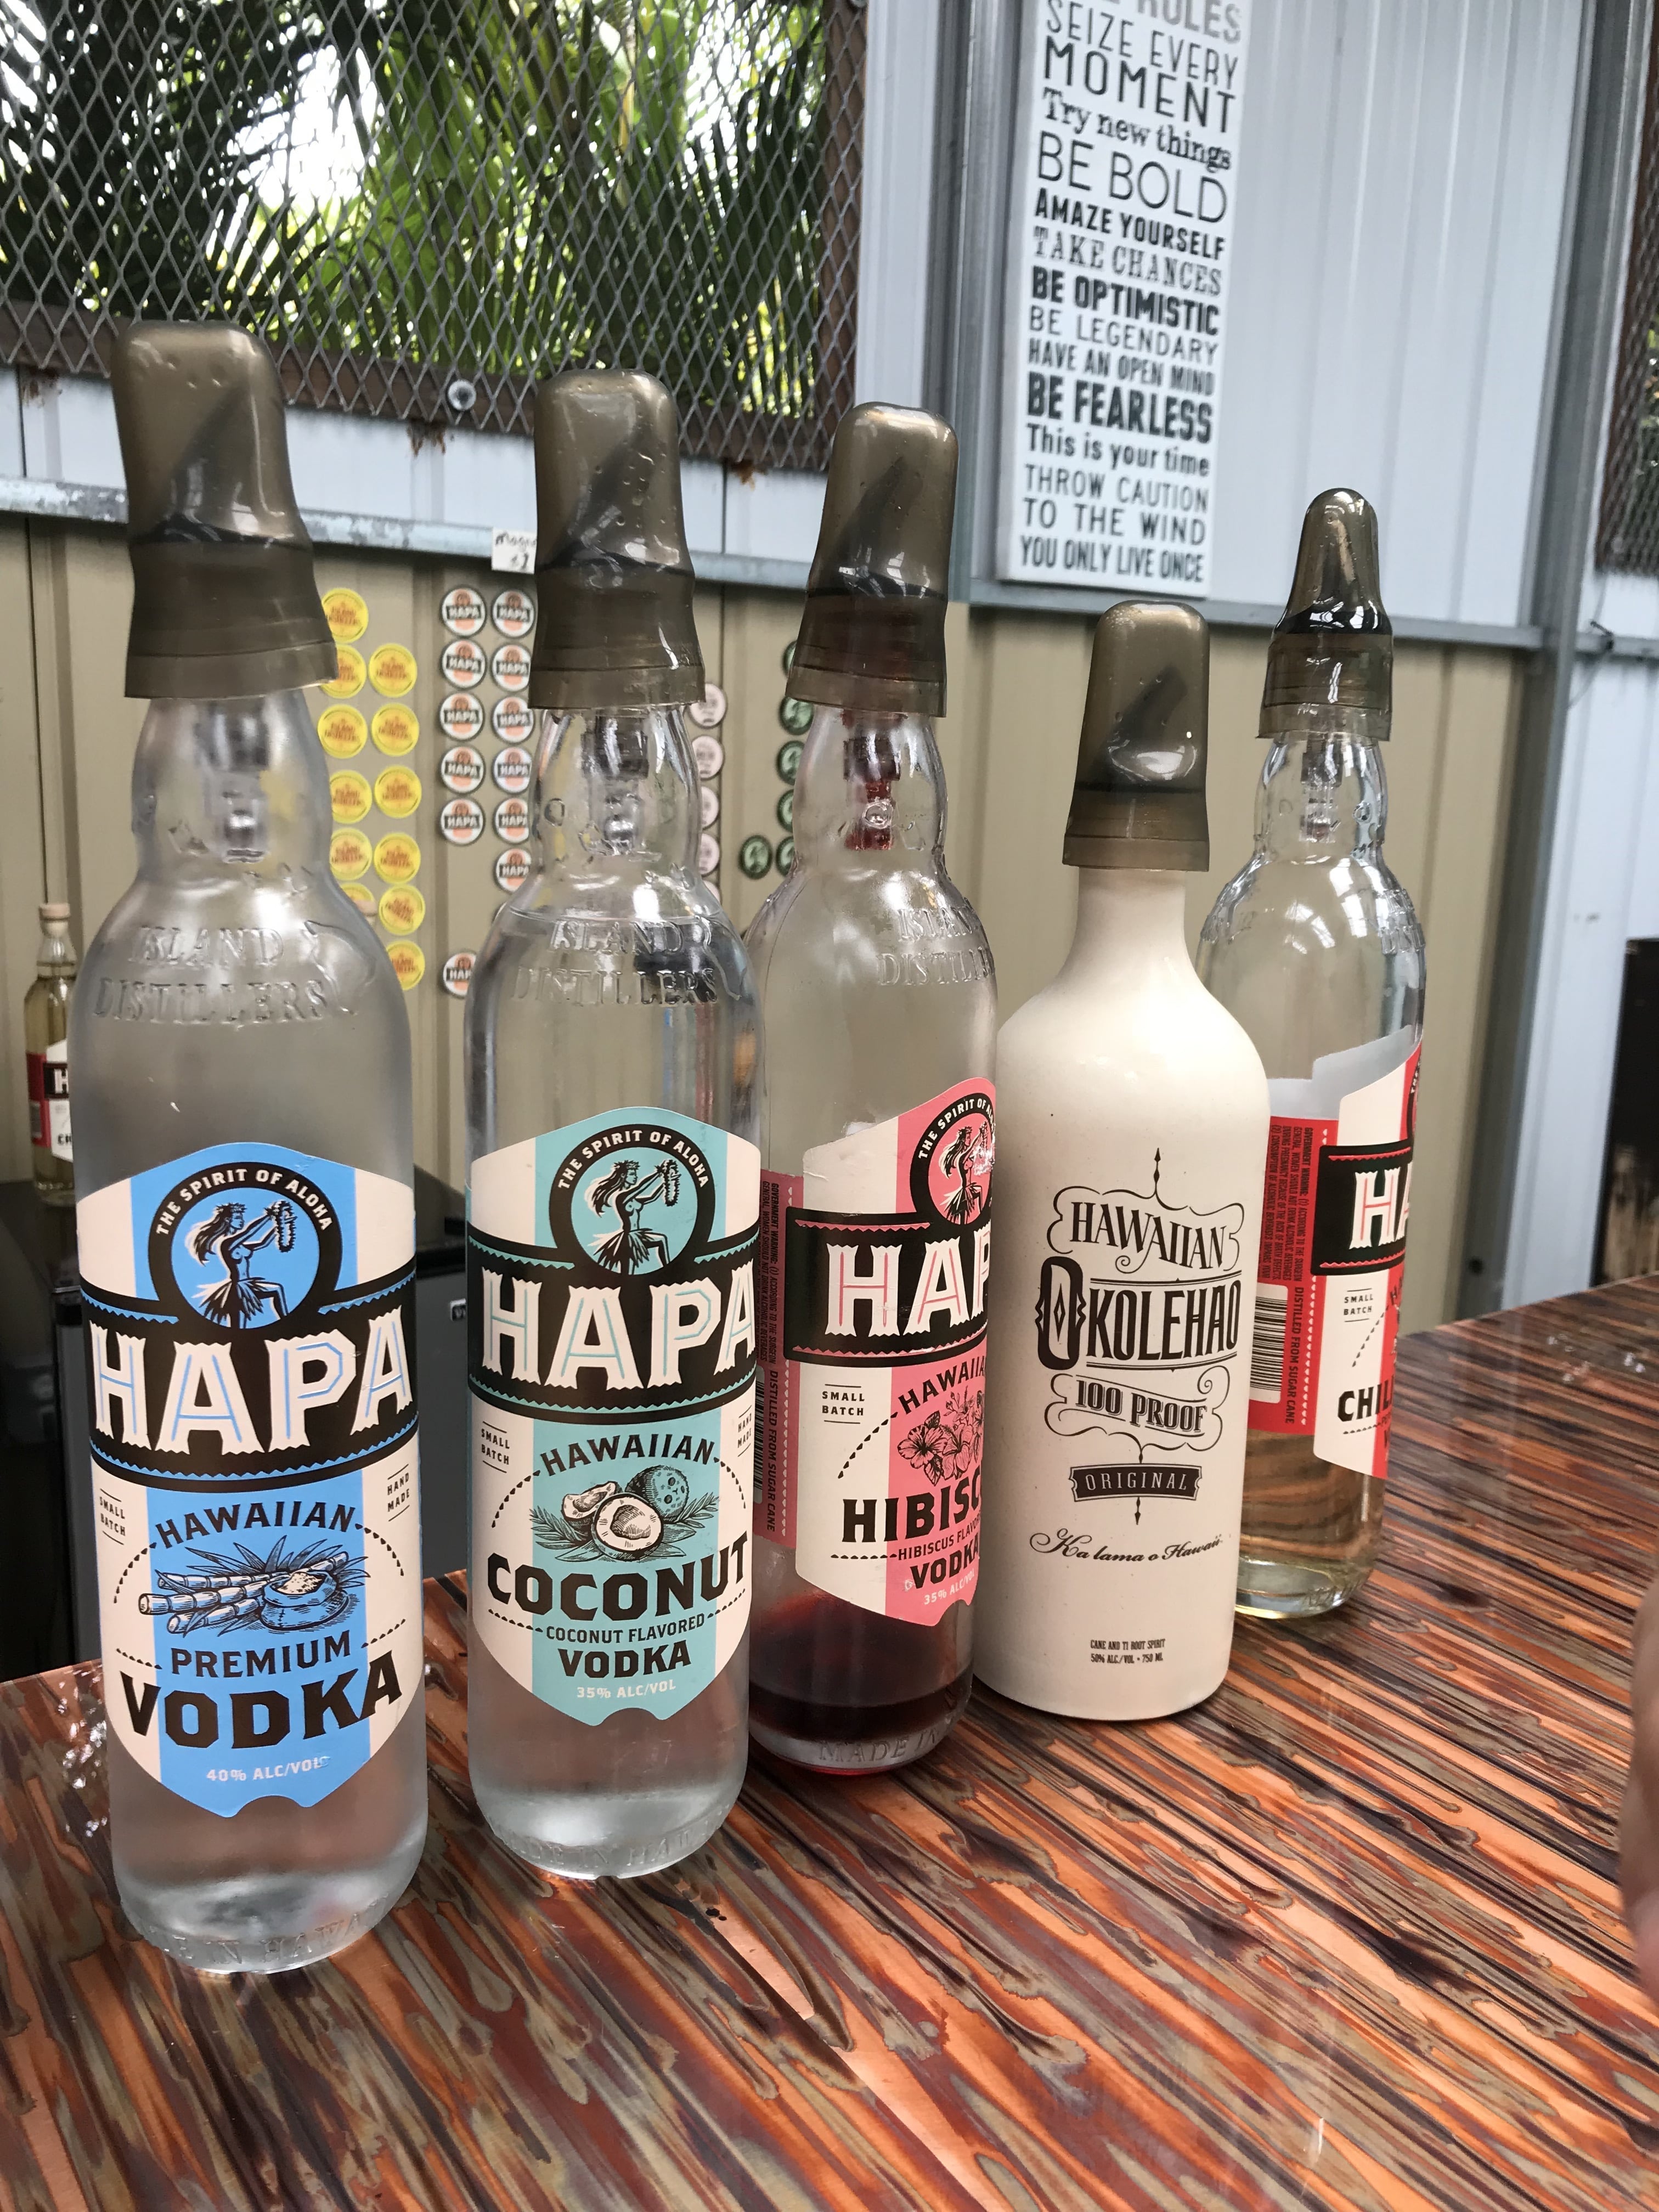 TOURING ISLAND DISTILLERS + TASTING ROOM - Sharing what you can expect when you tour Island Distillers in Honolulu, Hawaii! | Island Distillers Vodka - Oahu Distillery - Oahu Vodka - Coconut Vodka - Hawaii Distillery - Best Oahu Distillery - #oahu #hawaii #travel